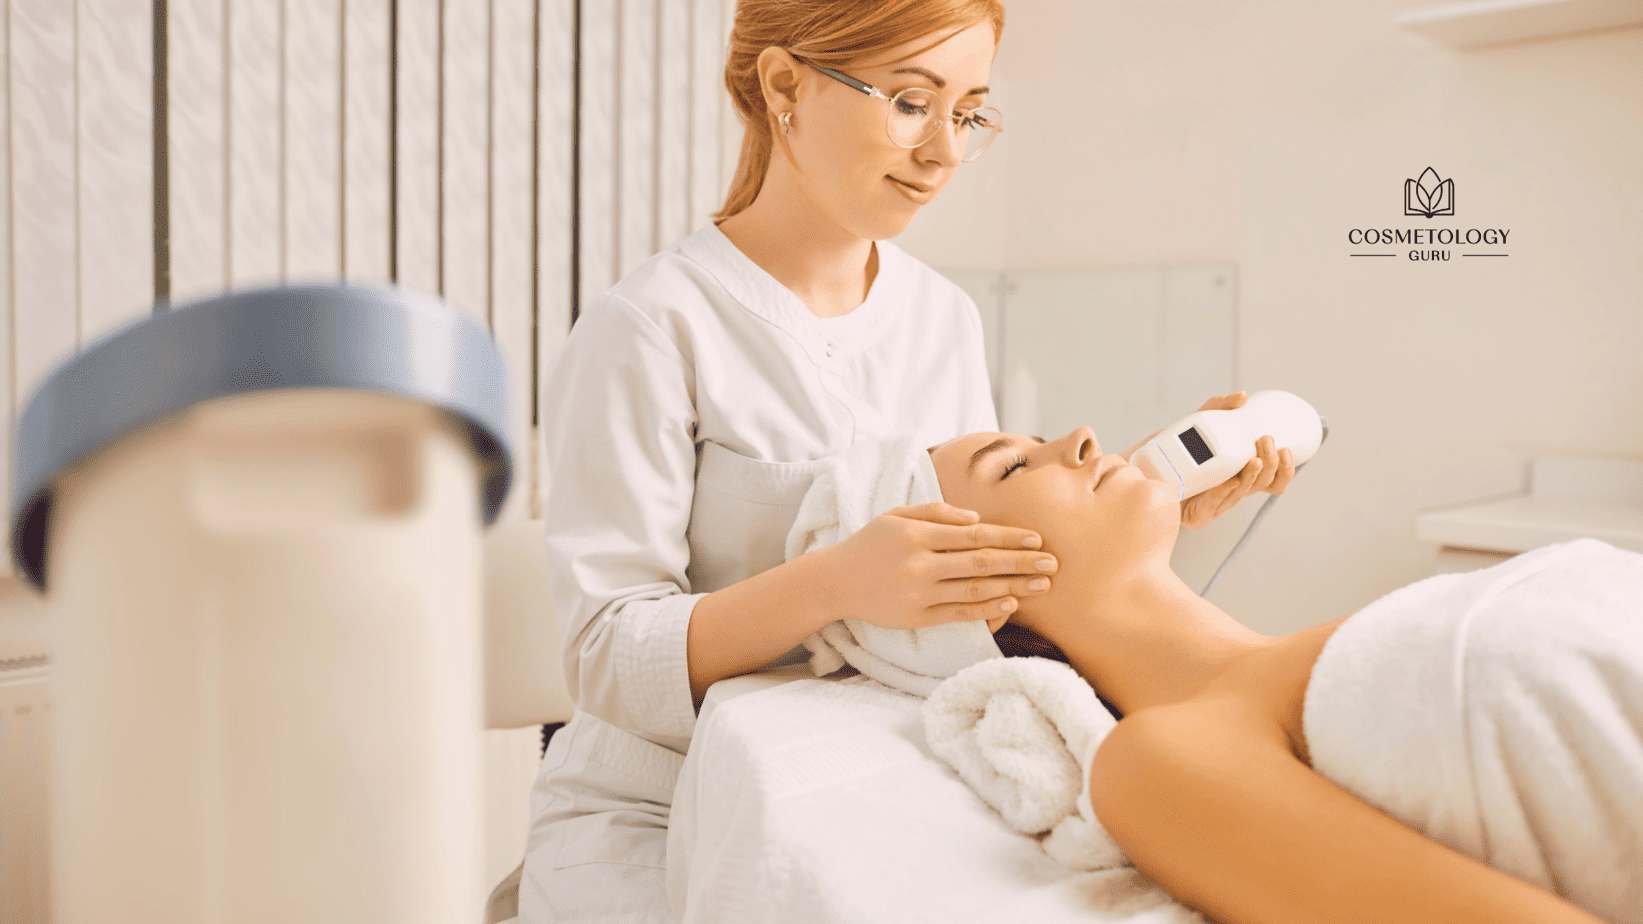 7 Highest Paying Jobs in Cosmetology in 2022